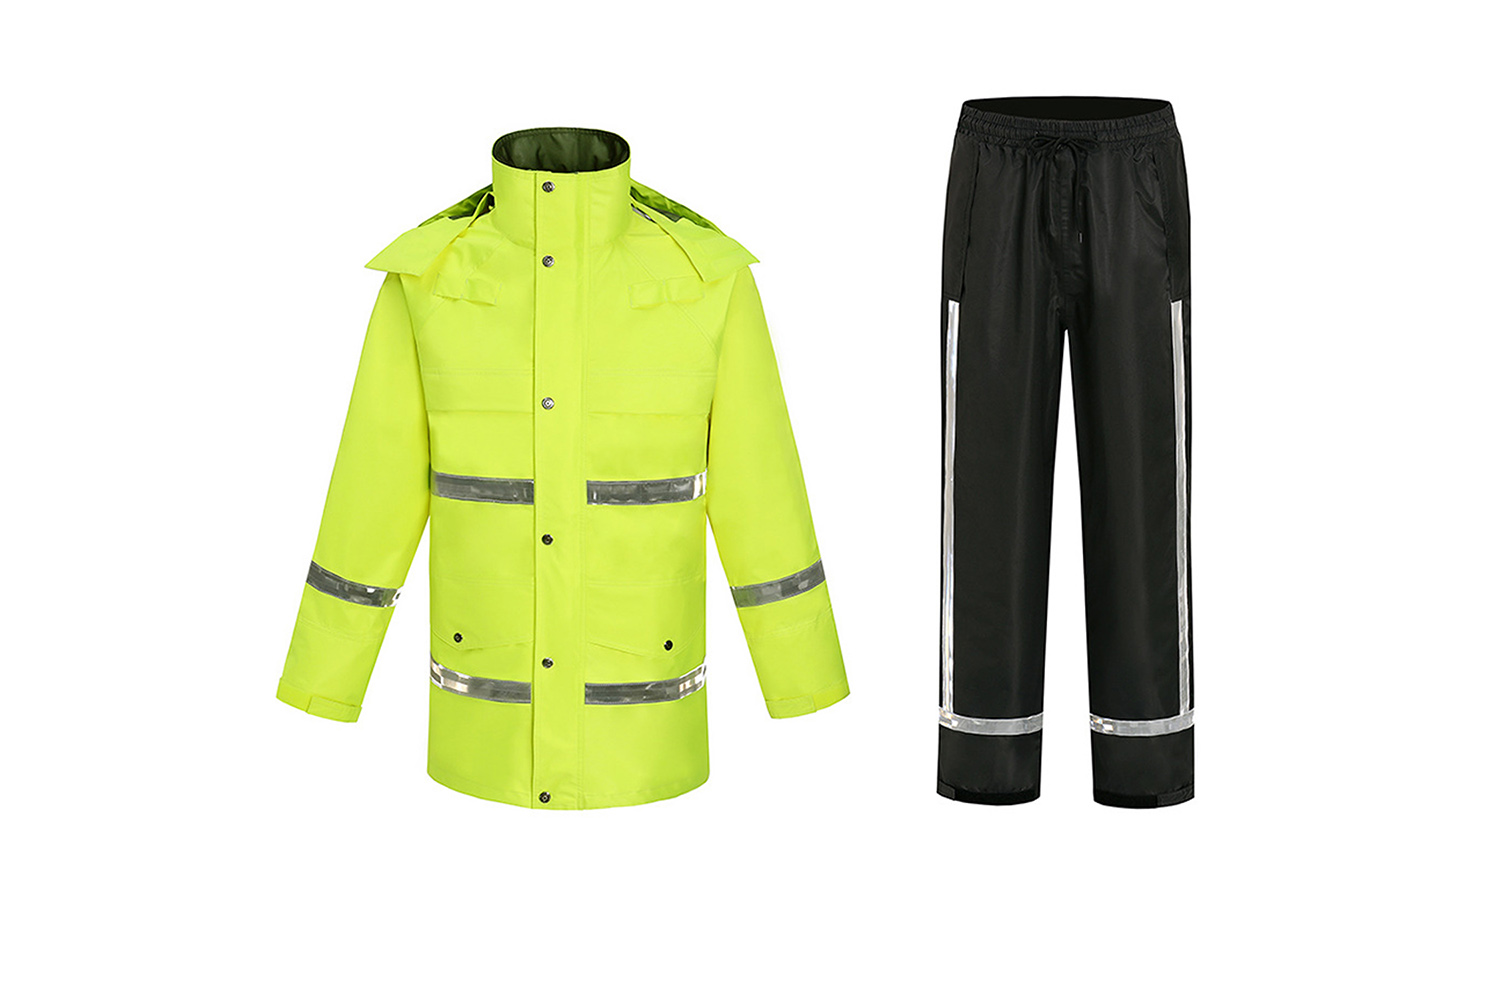 Reflective Raincoat Highlighted Safety Model ZX-999